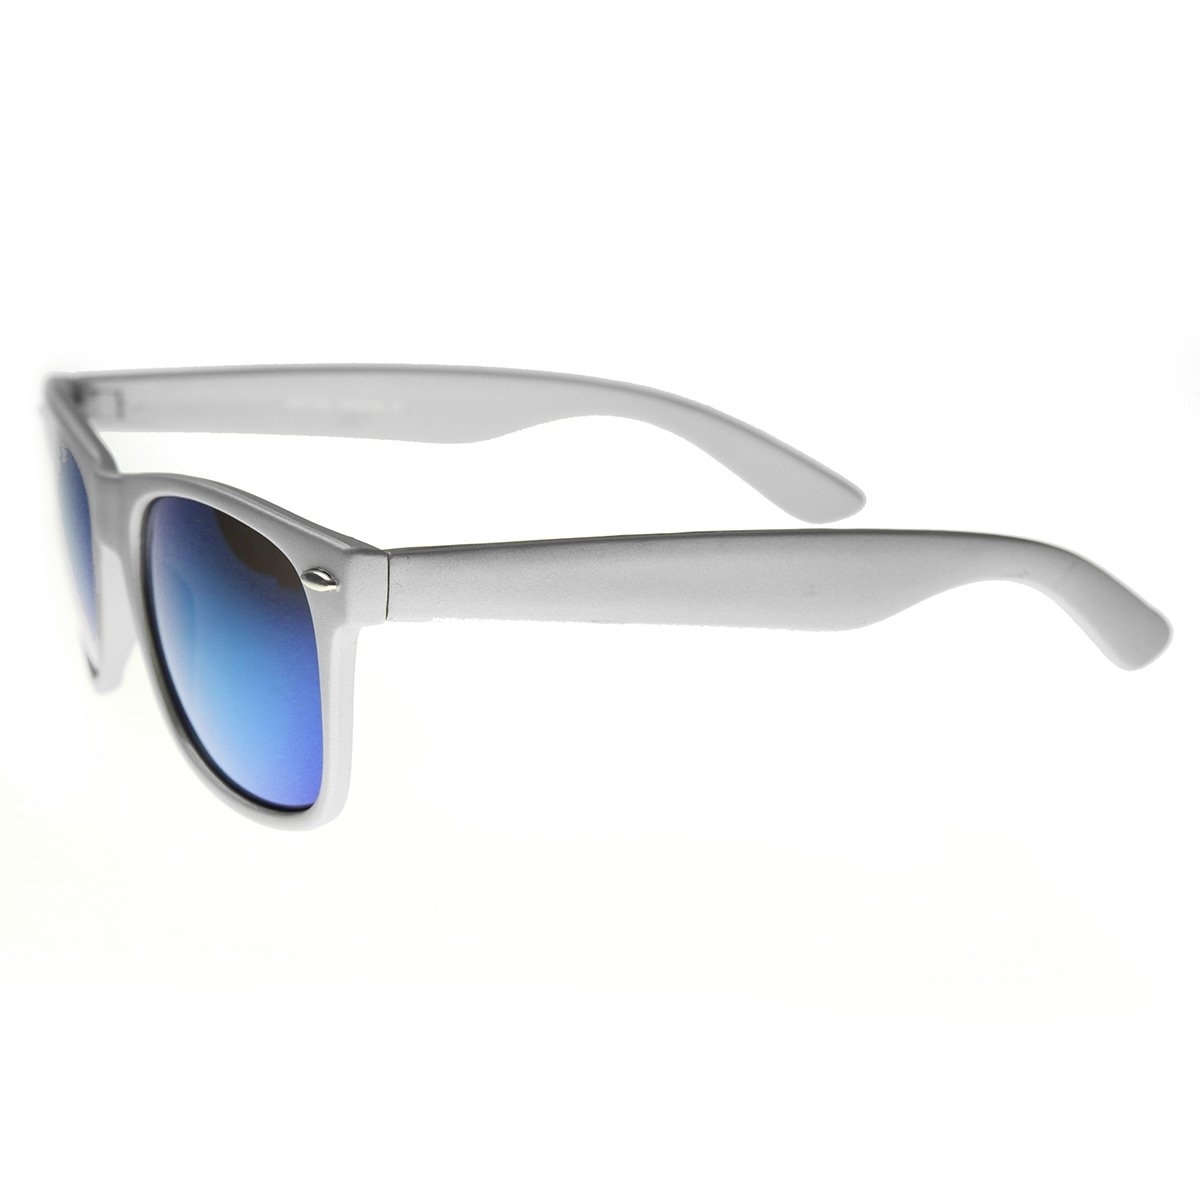 Classic Horn Rimmed Sunglasses With Flash Mirro Lens - Grey Midnight